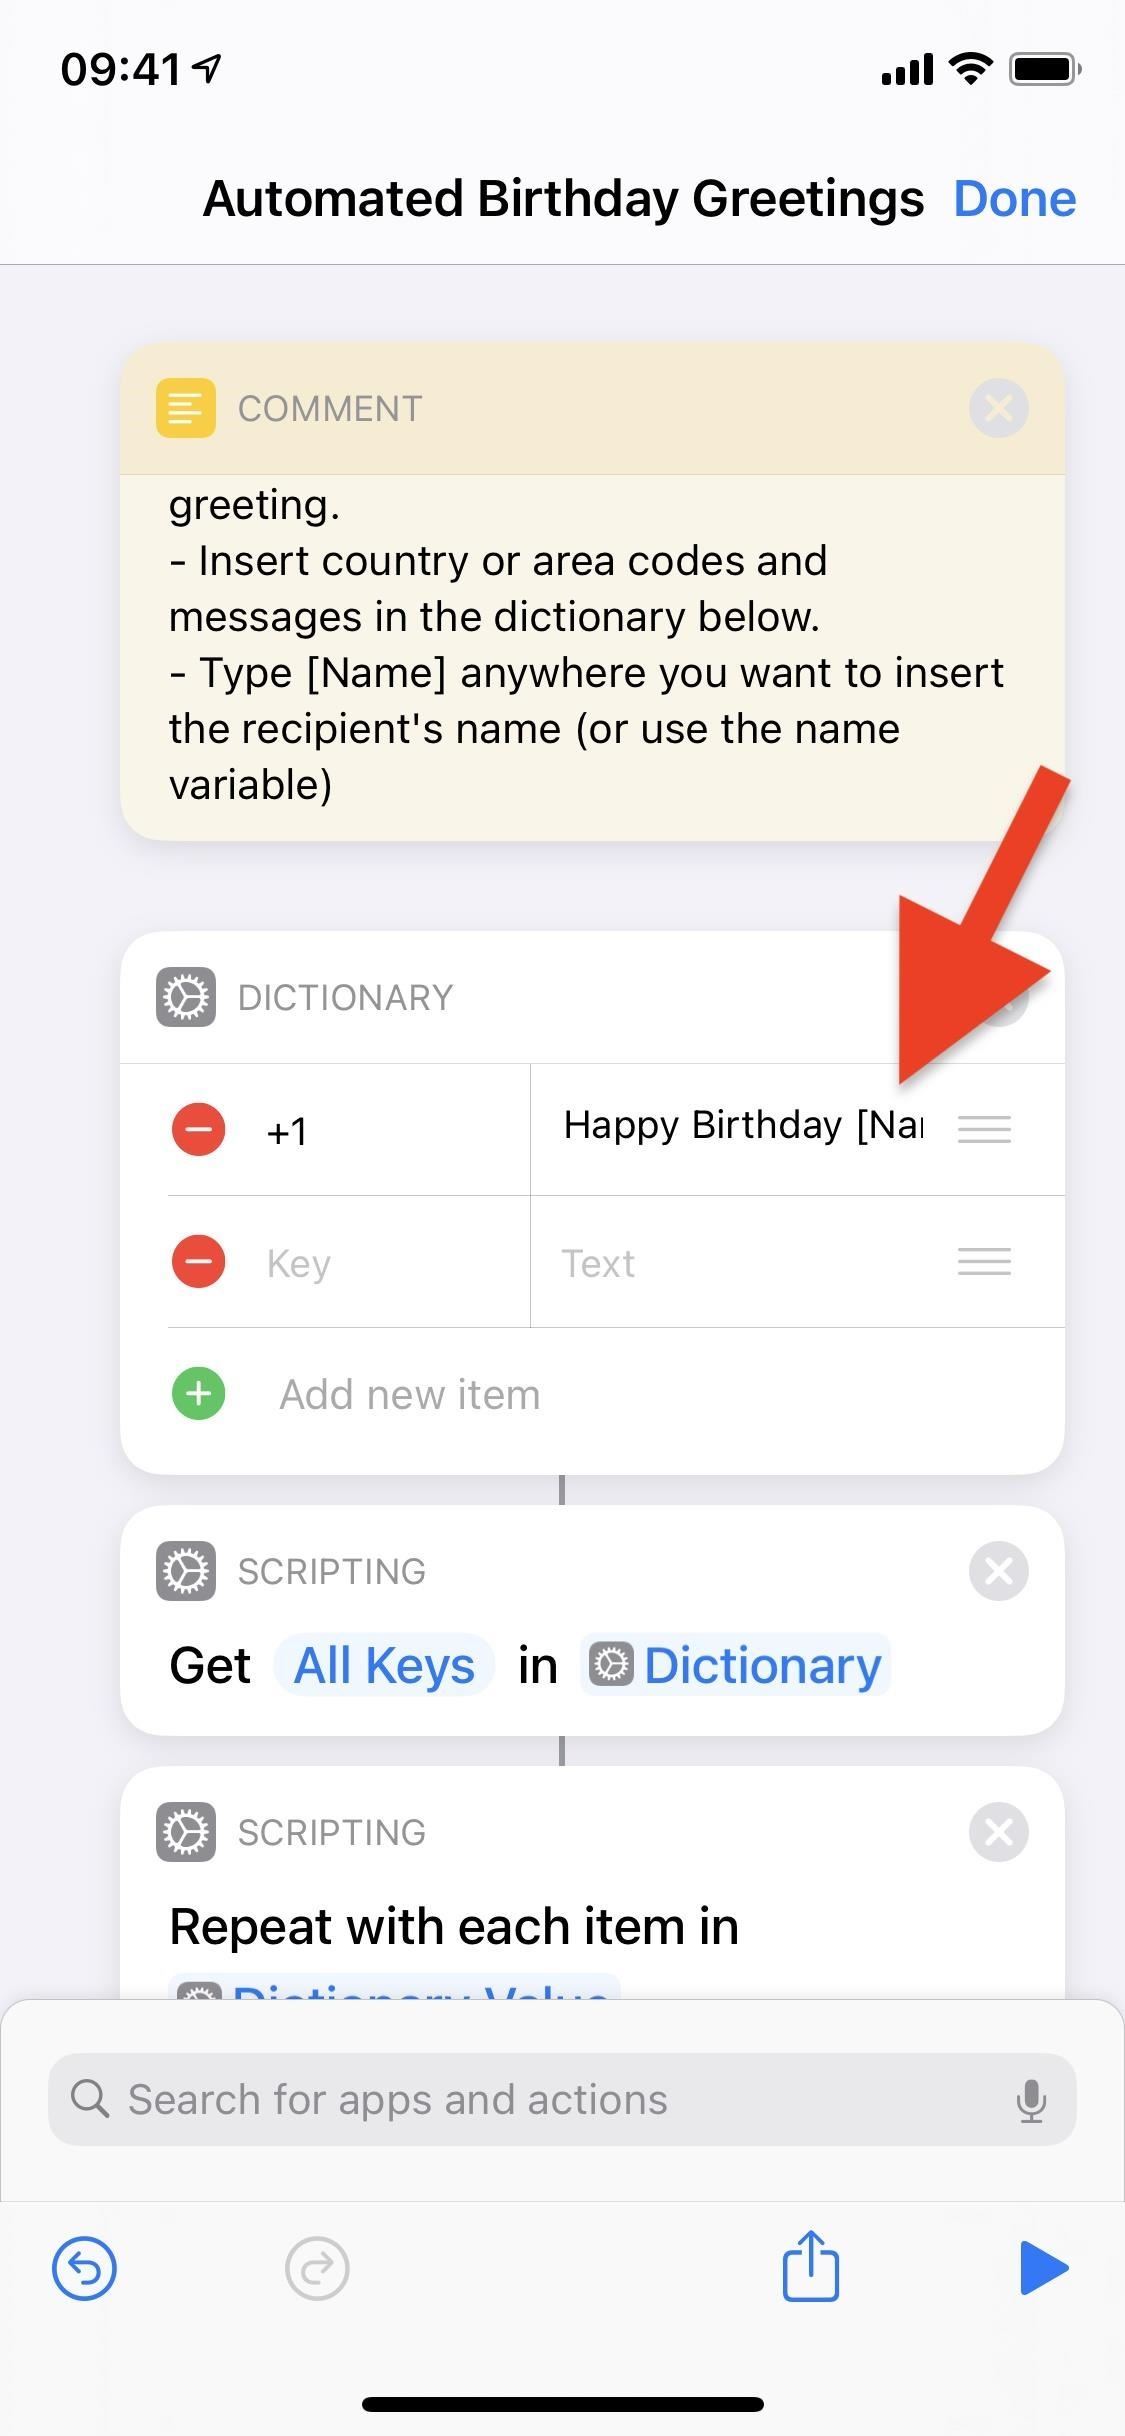 This Shortcut Automates Sending Birthday Wishes to Your Contacts So You Never Have to Remember Again